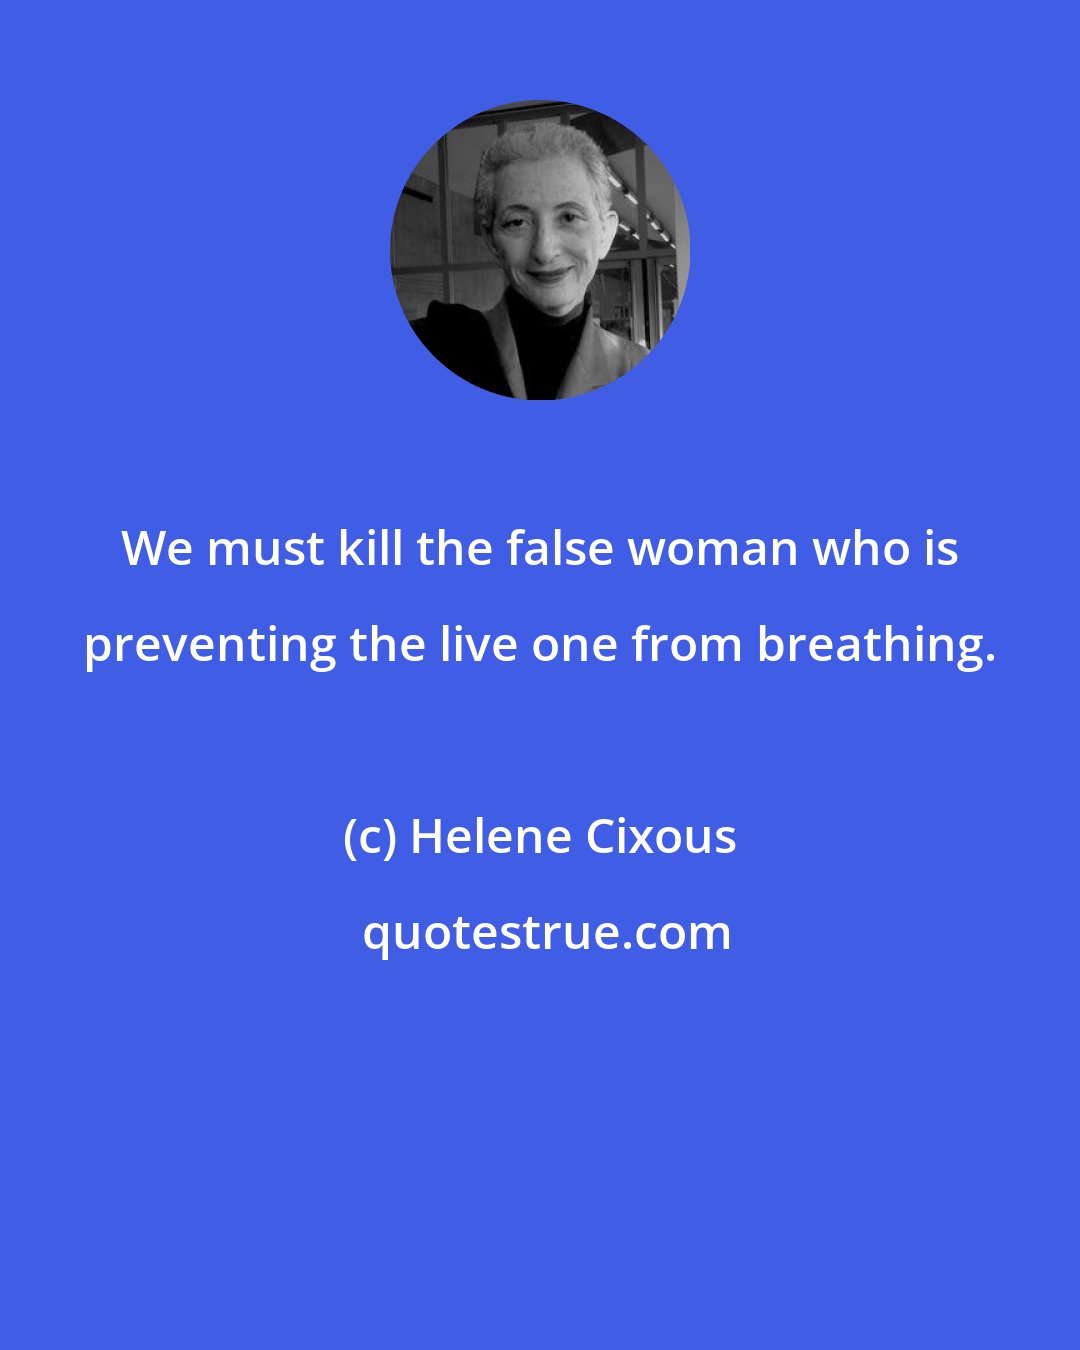 Helene Cixous: We must kill the false woman who is preventing the live one from breathing.